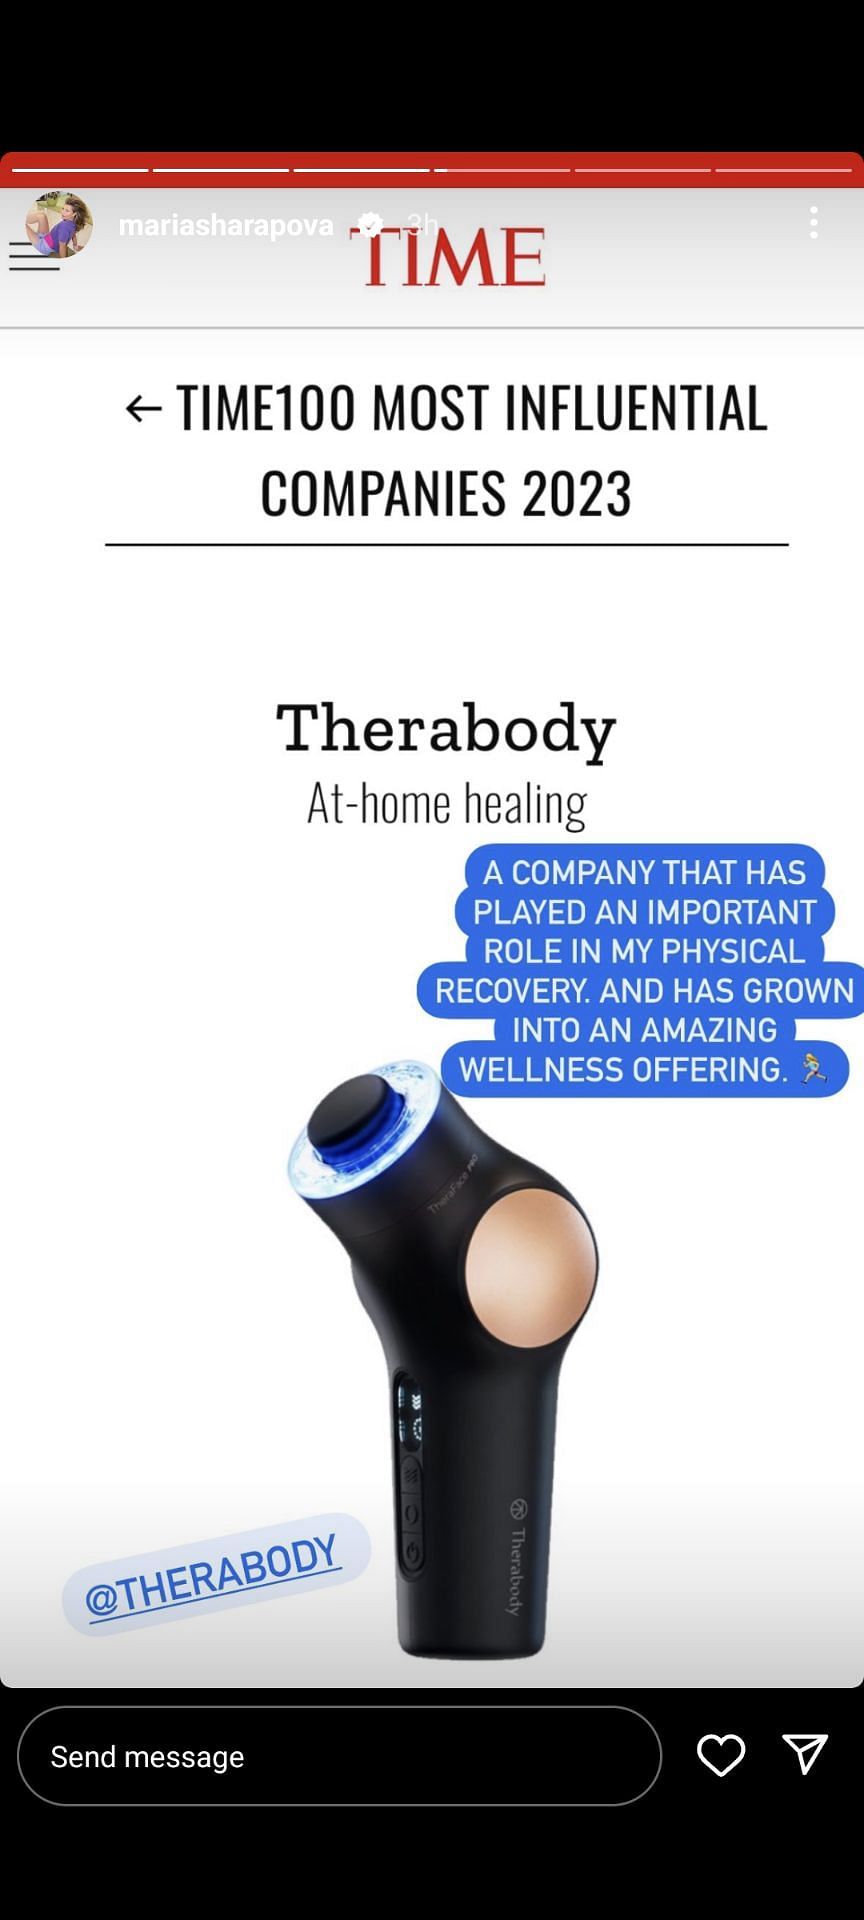 Therabody has evolved into an amazing wellness offering (Source: IG stories)